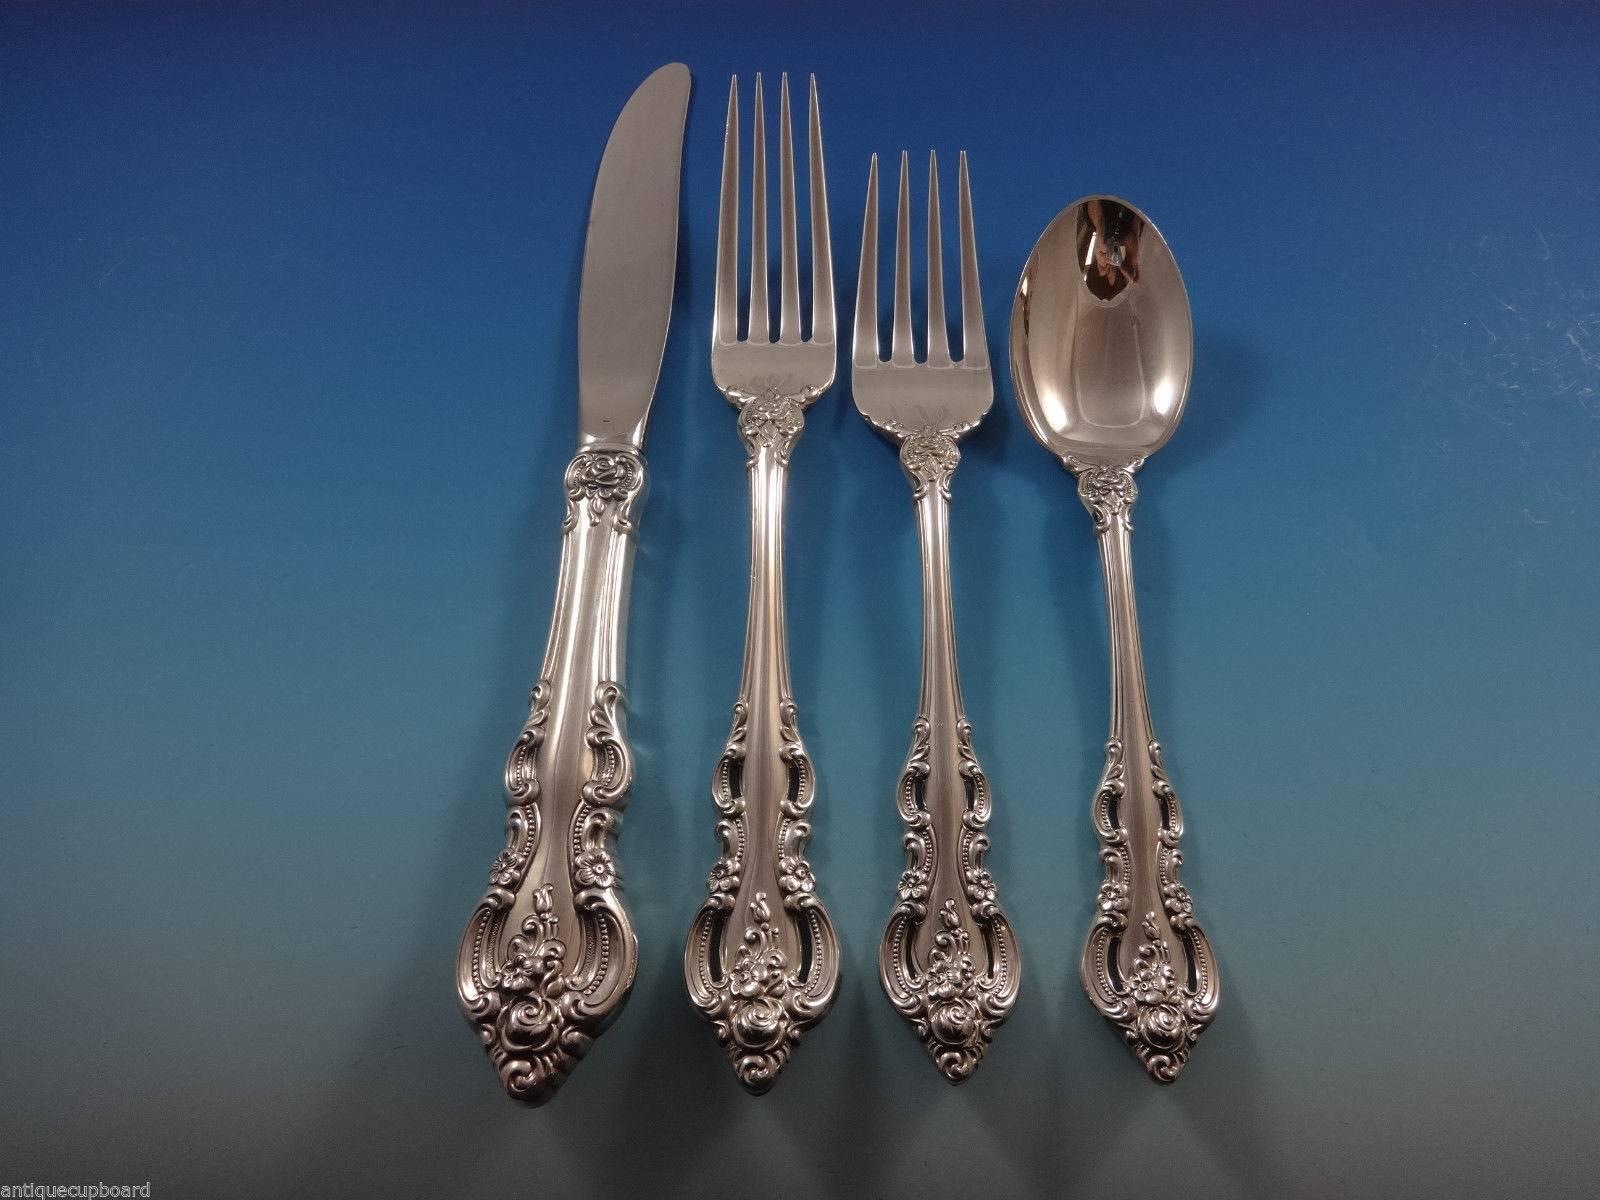 Lavish, handcrafted detailing graces the stem and handle of this pattern. El Grandee is a richly designed, highly sophisticated addition to any formal setting.

 El Grandee by Towle sterling silver flatware set of 52 pieces. This set includes:

12